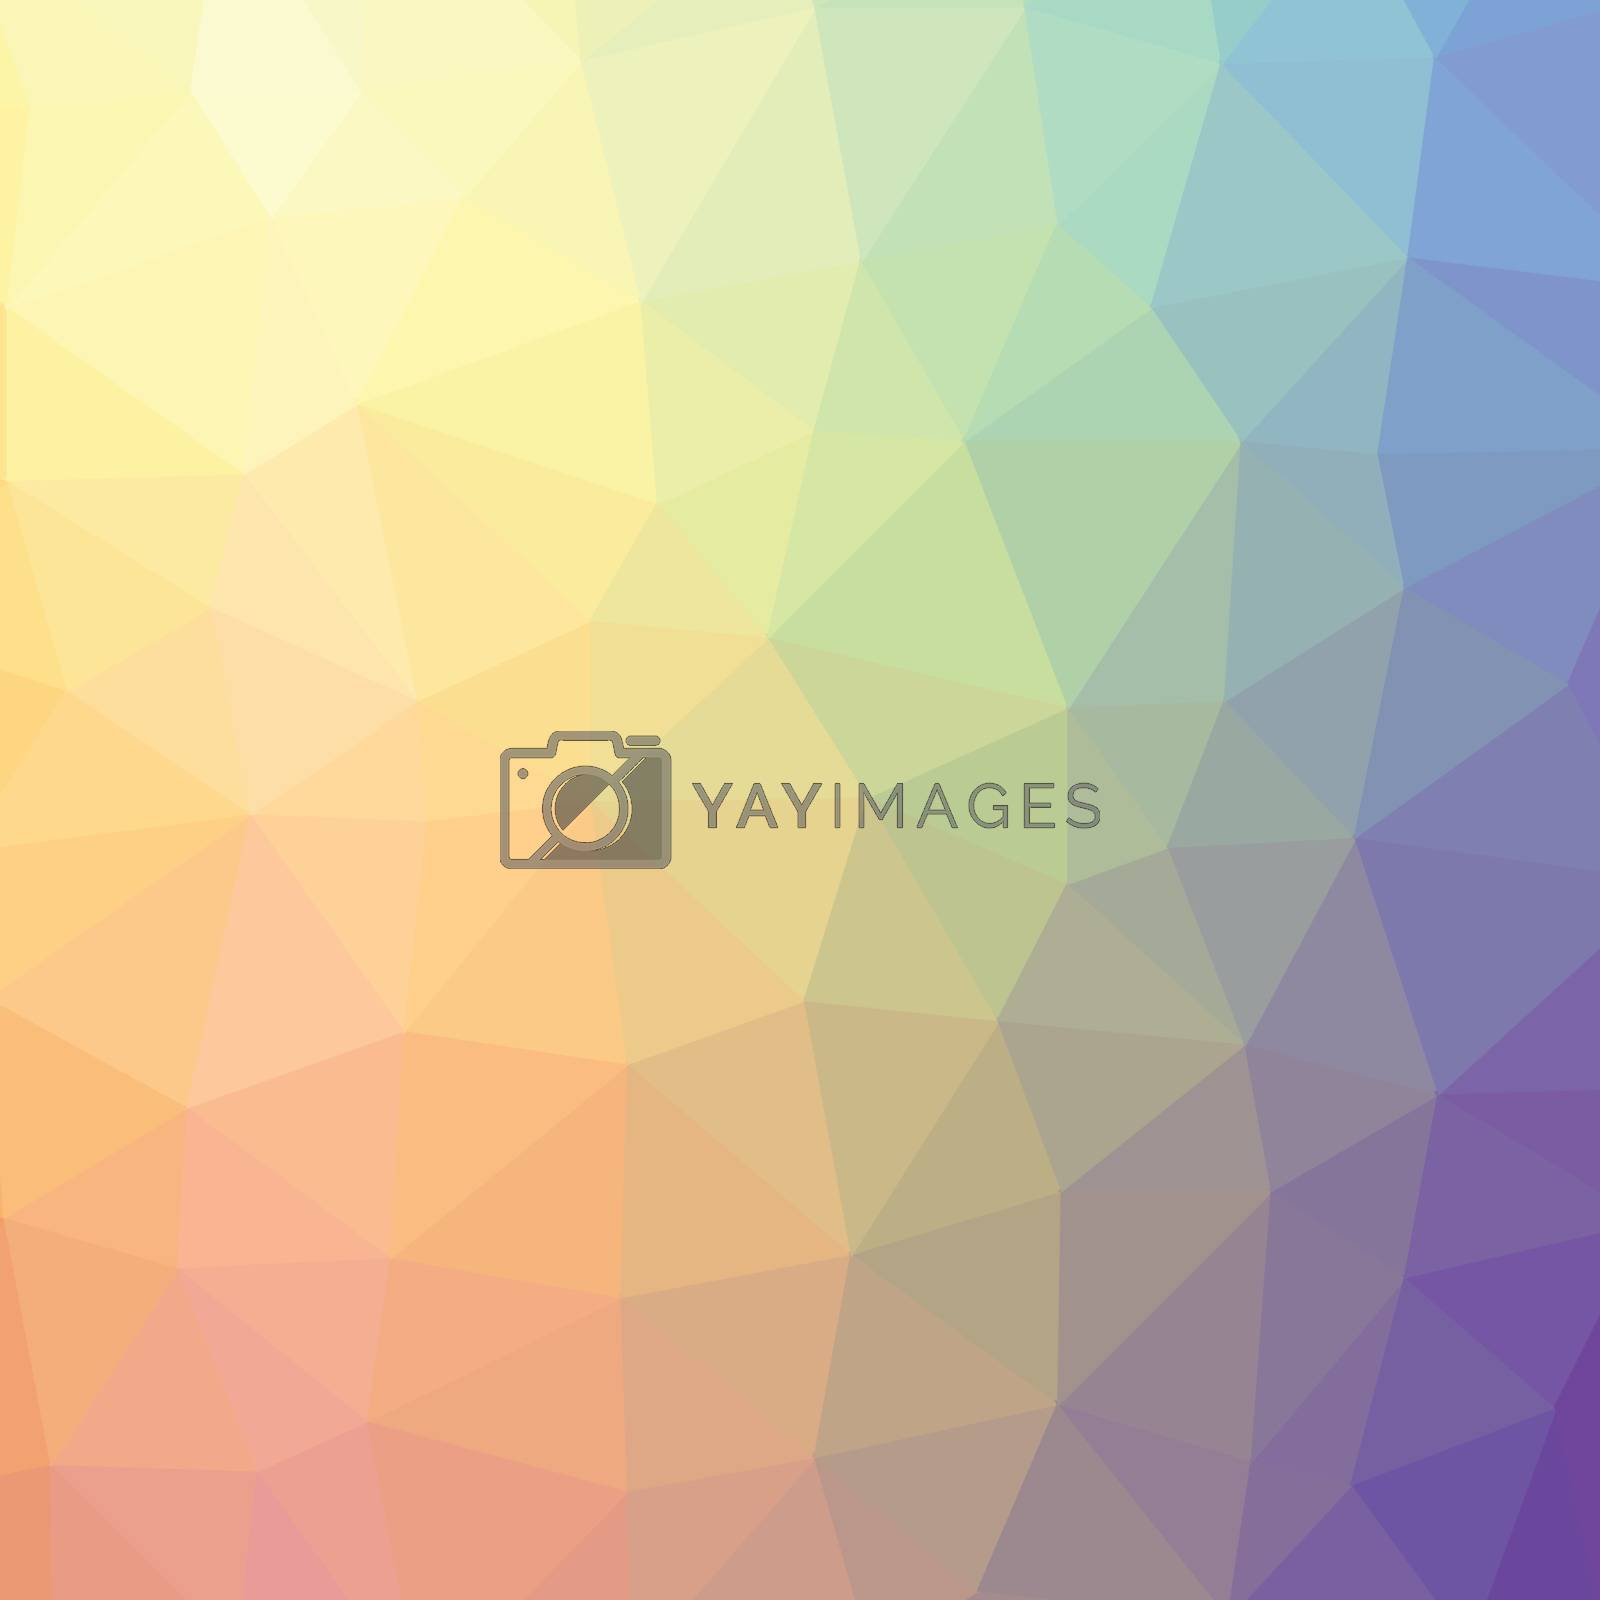 Royalty free image of Pastel colors abstract geometric low poly style vector illustration graphic background. by mcherevan